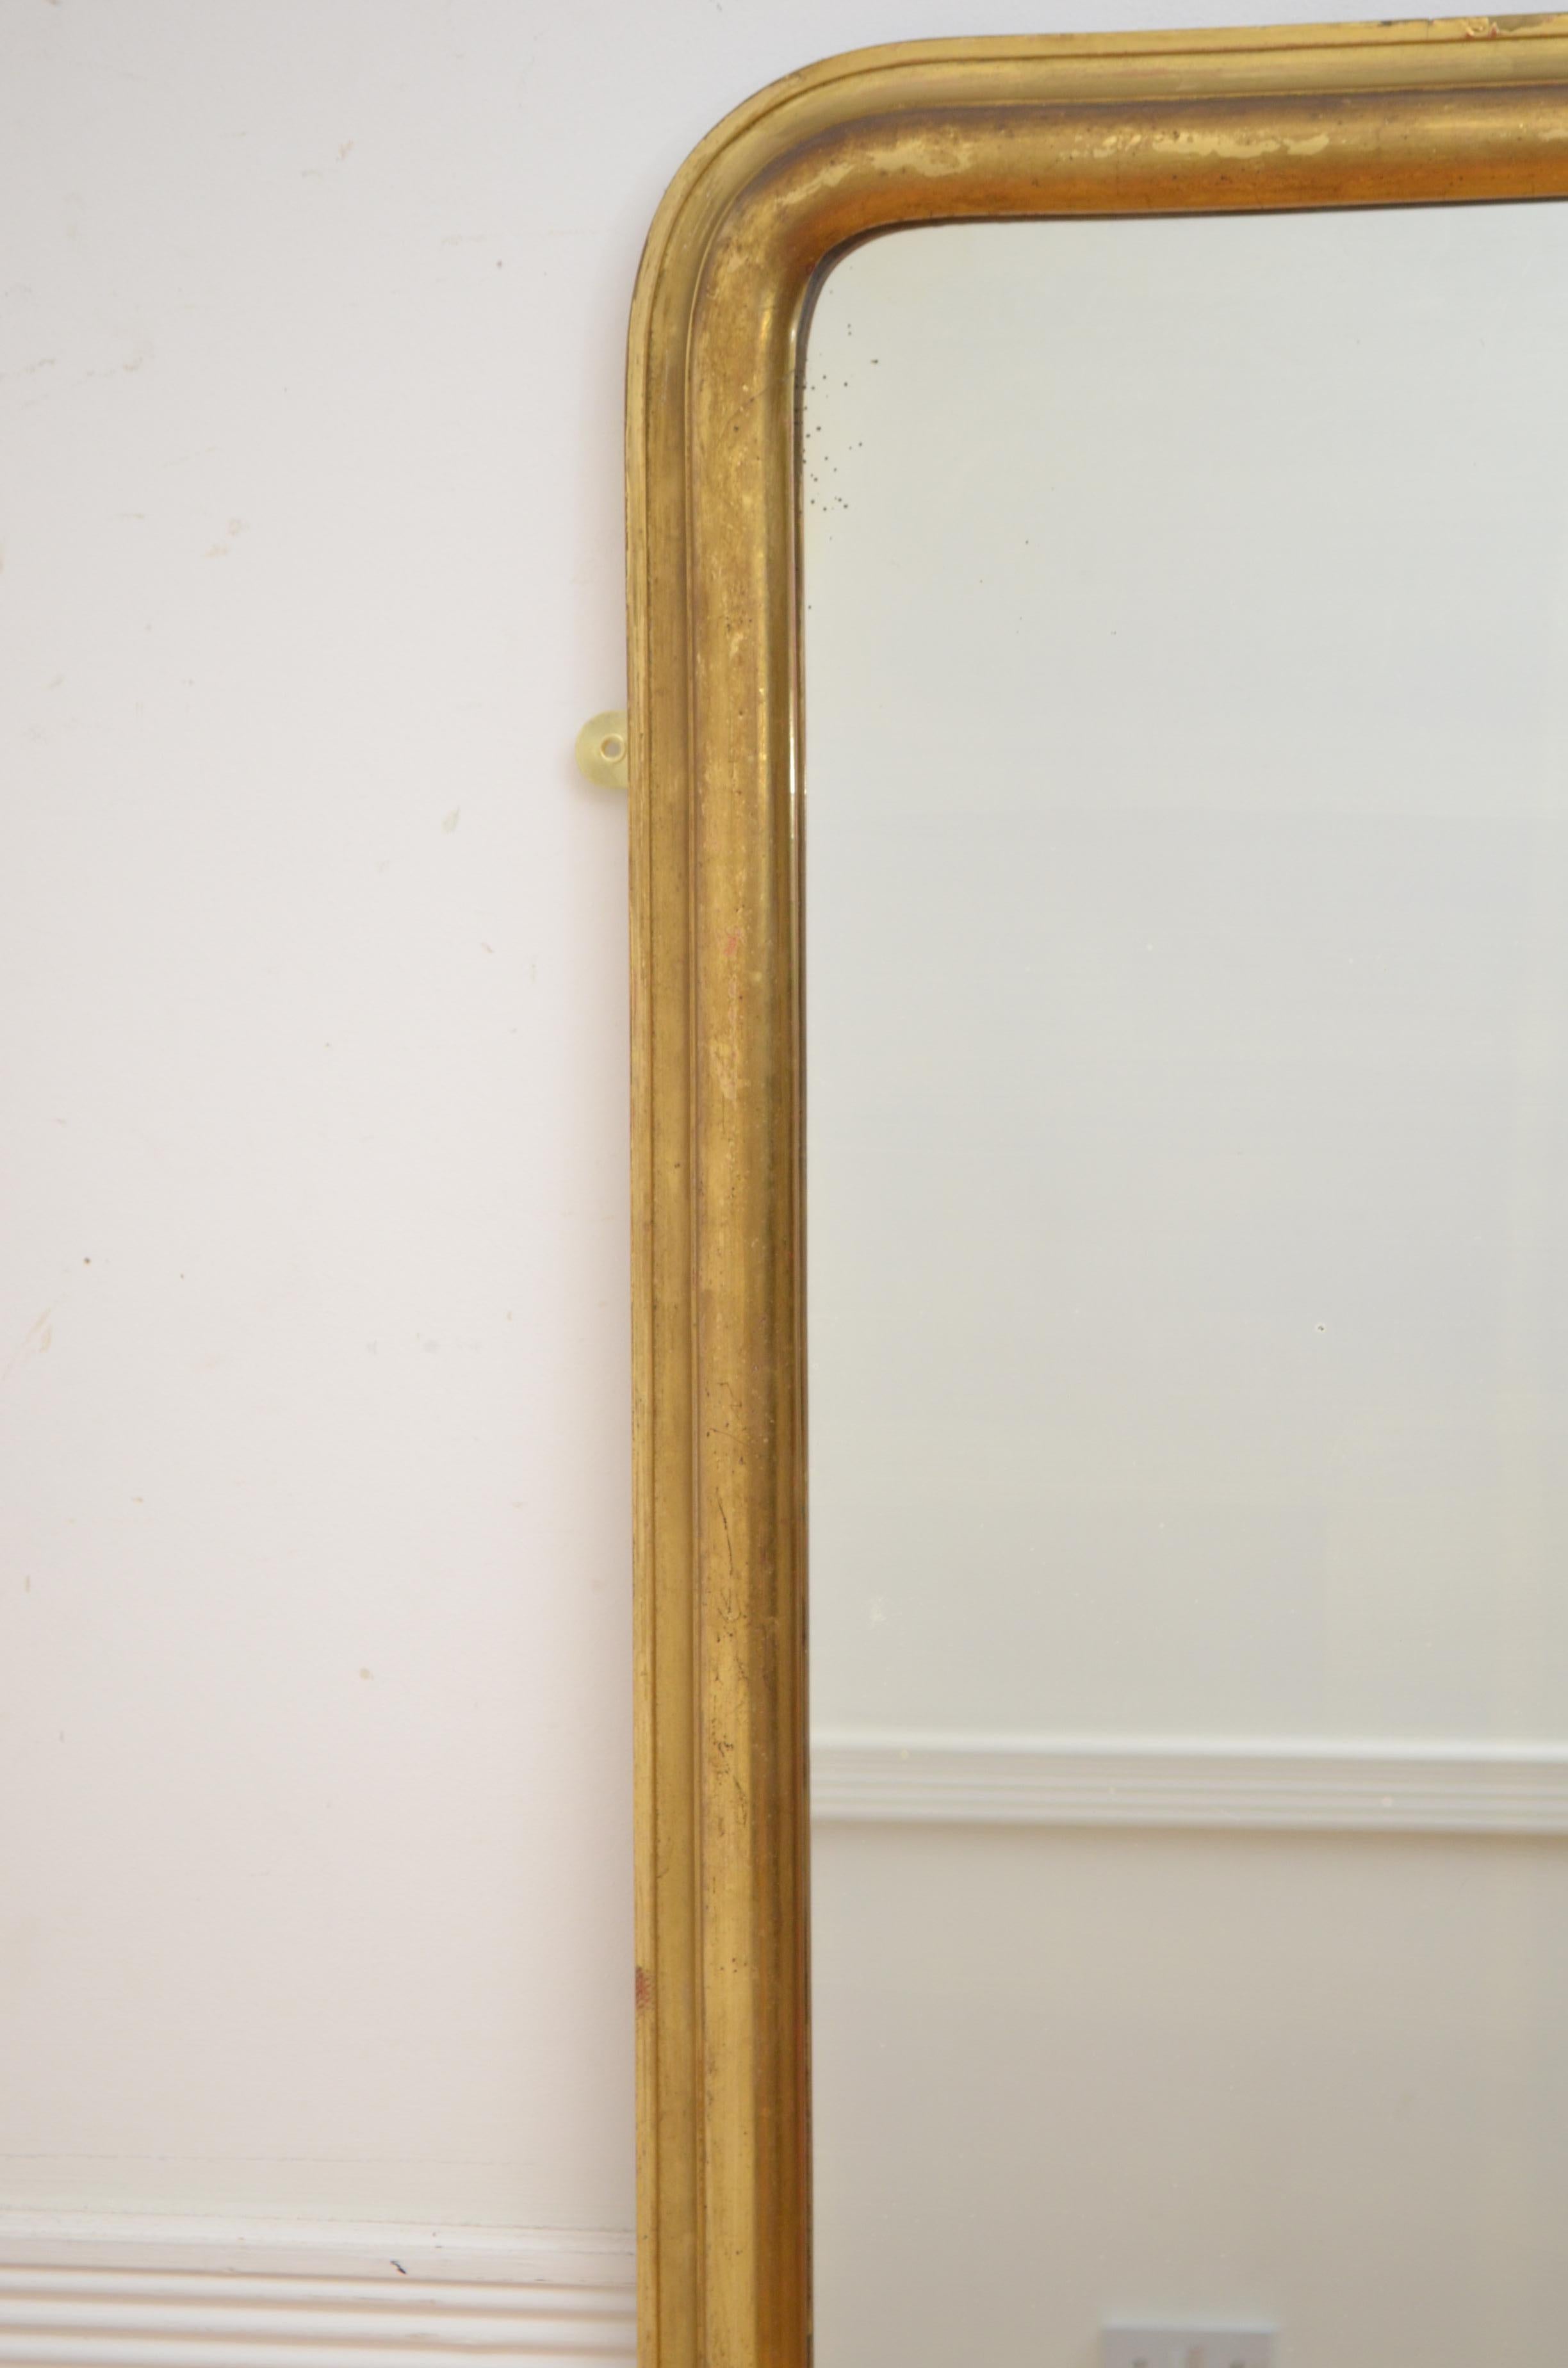 Fine Early 19th Century Floor Standing / Wall Mirror In Good Condition For Sale In Whaley Bridge, GB